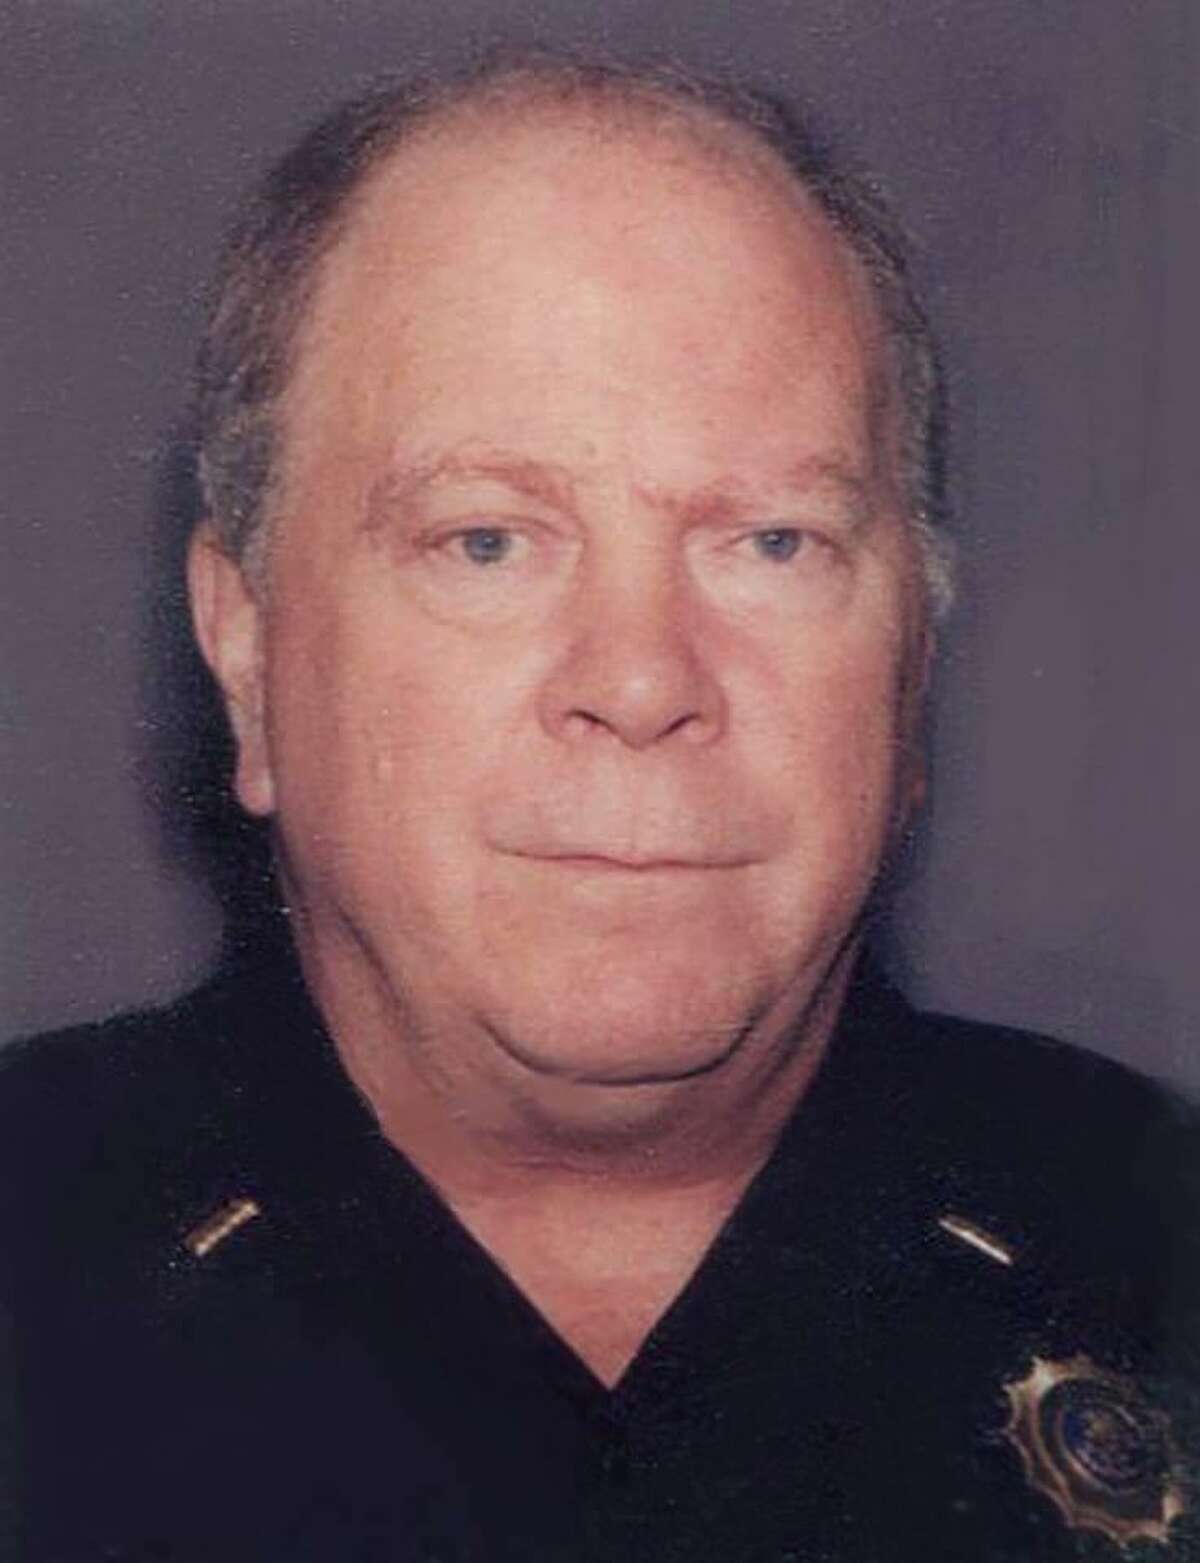 A former Greenwich police lieutenant, Robert J. Brown Sr., died at the age of 74.